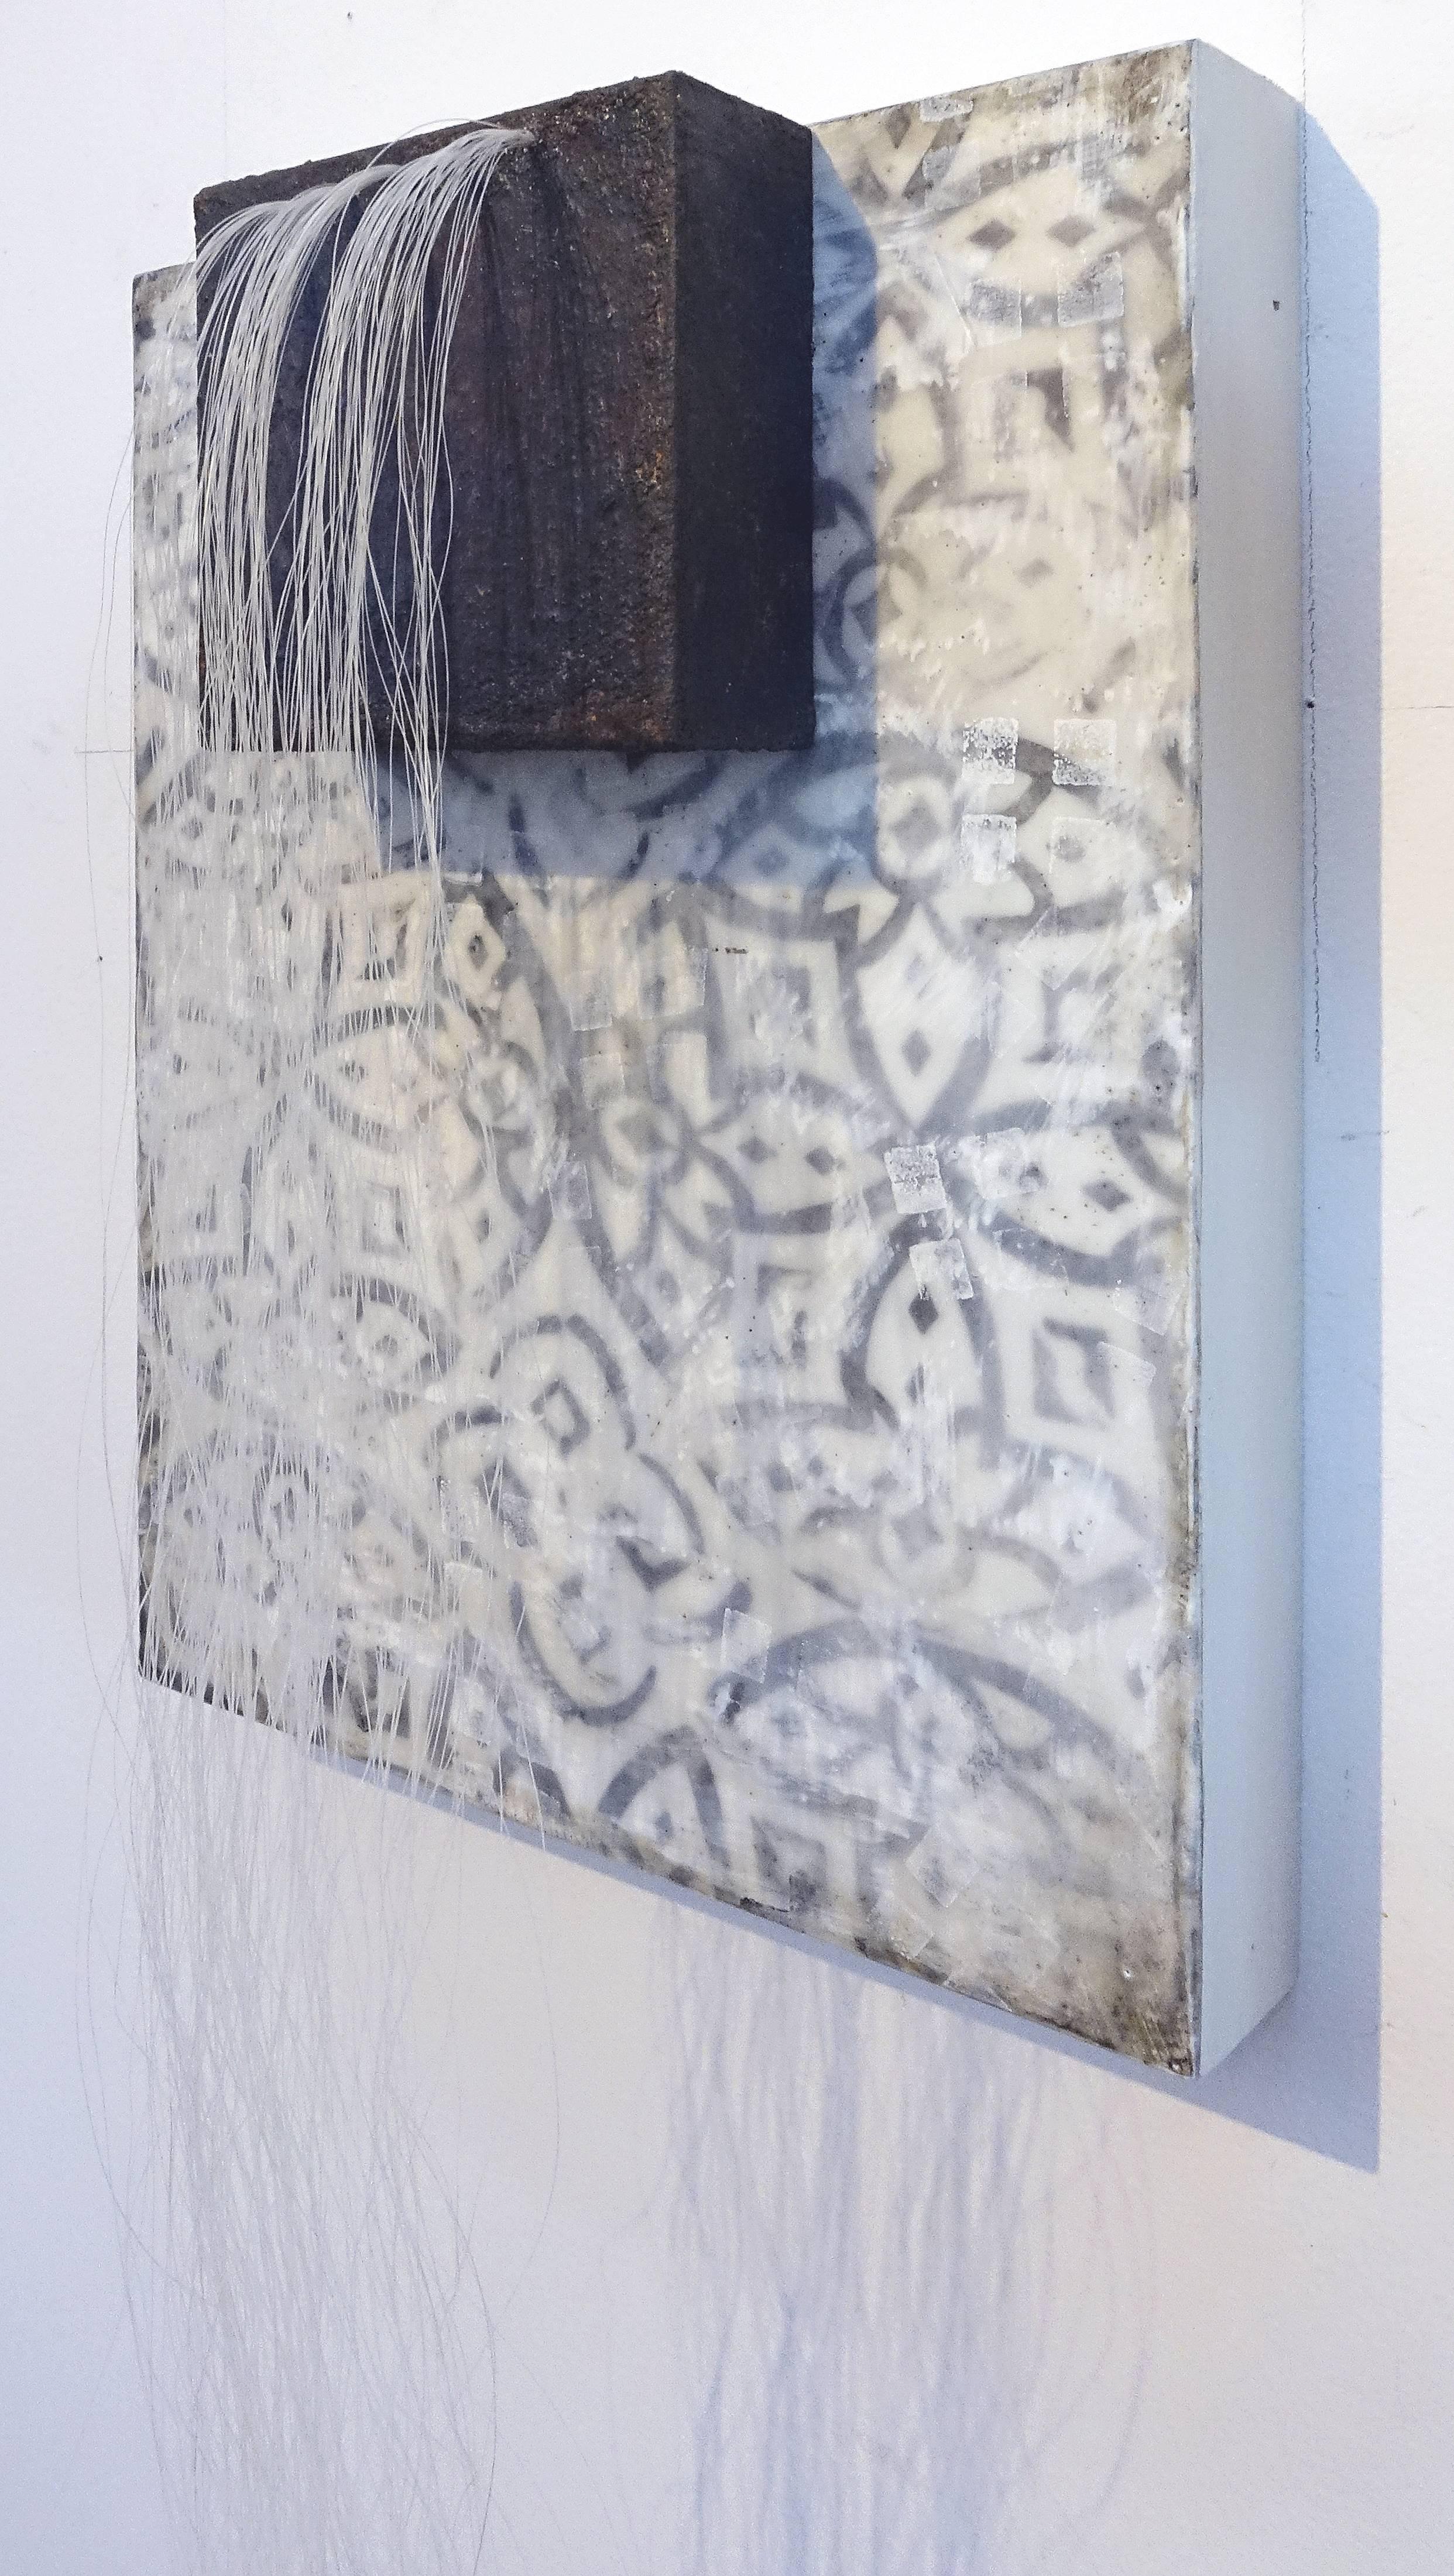 Hairfall (Mixed Media Abstract Wall Sculpture with Grey & White Mosaic Pattern) - Contemporary Mixed Media Art by Susan Stover